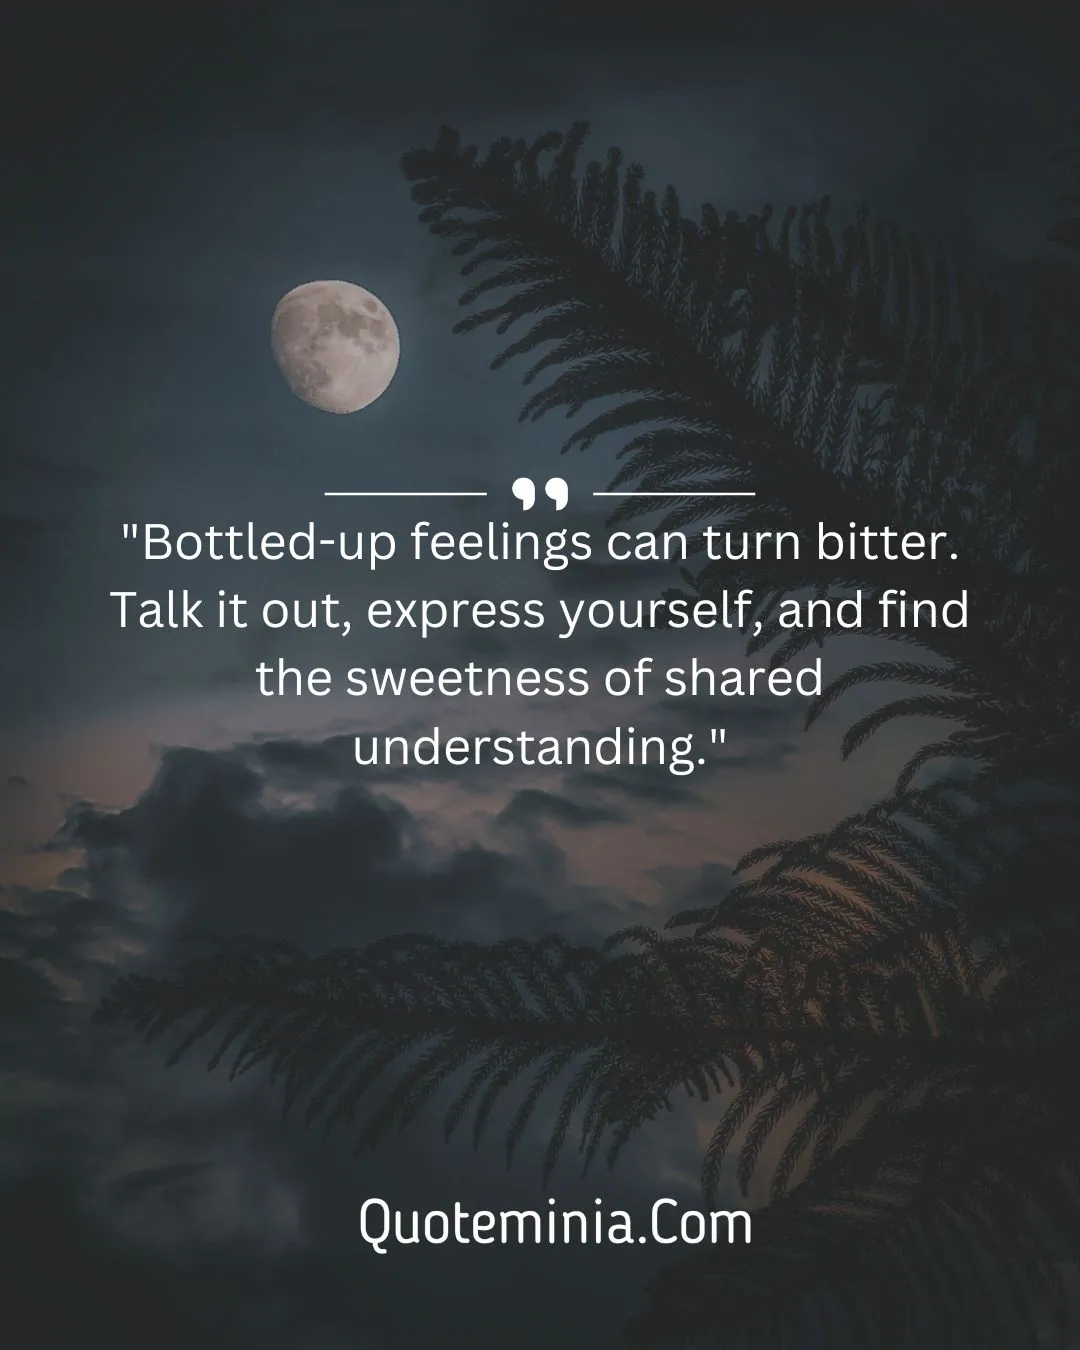 Don't Suffer in Silence Quotes Image 2